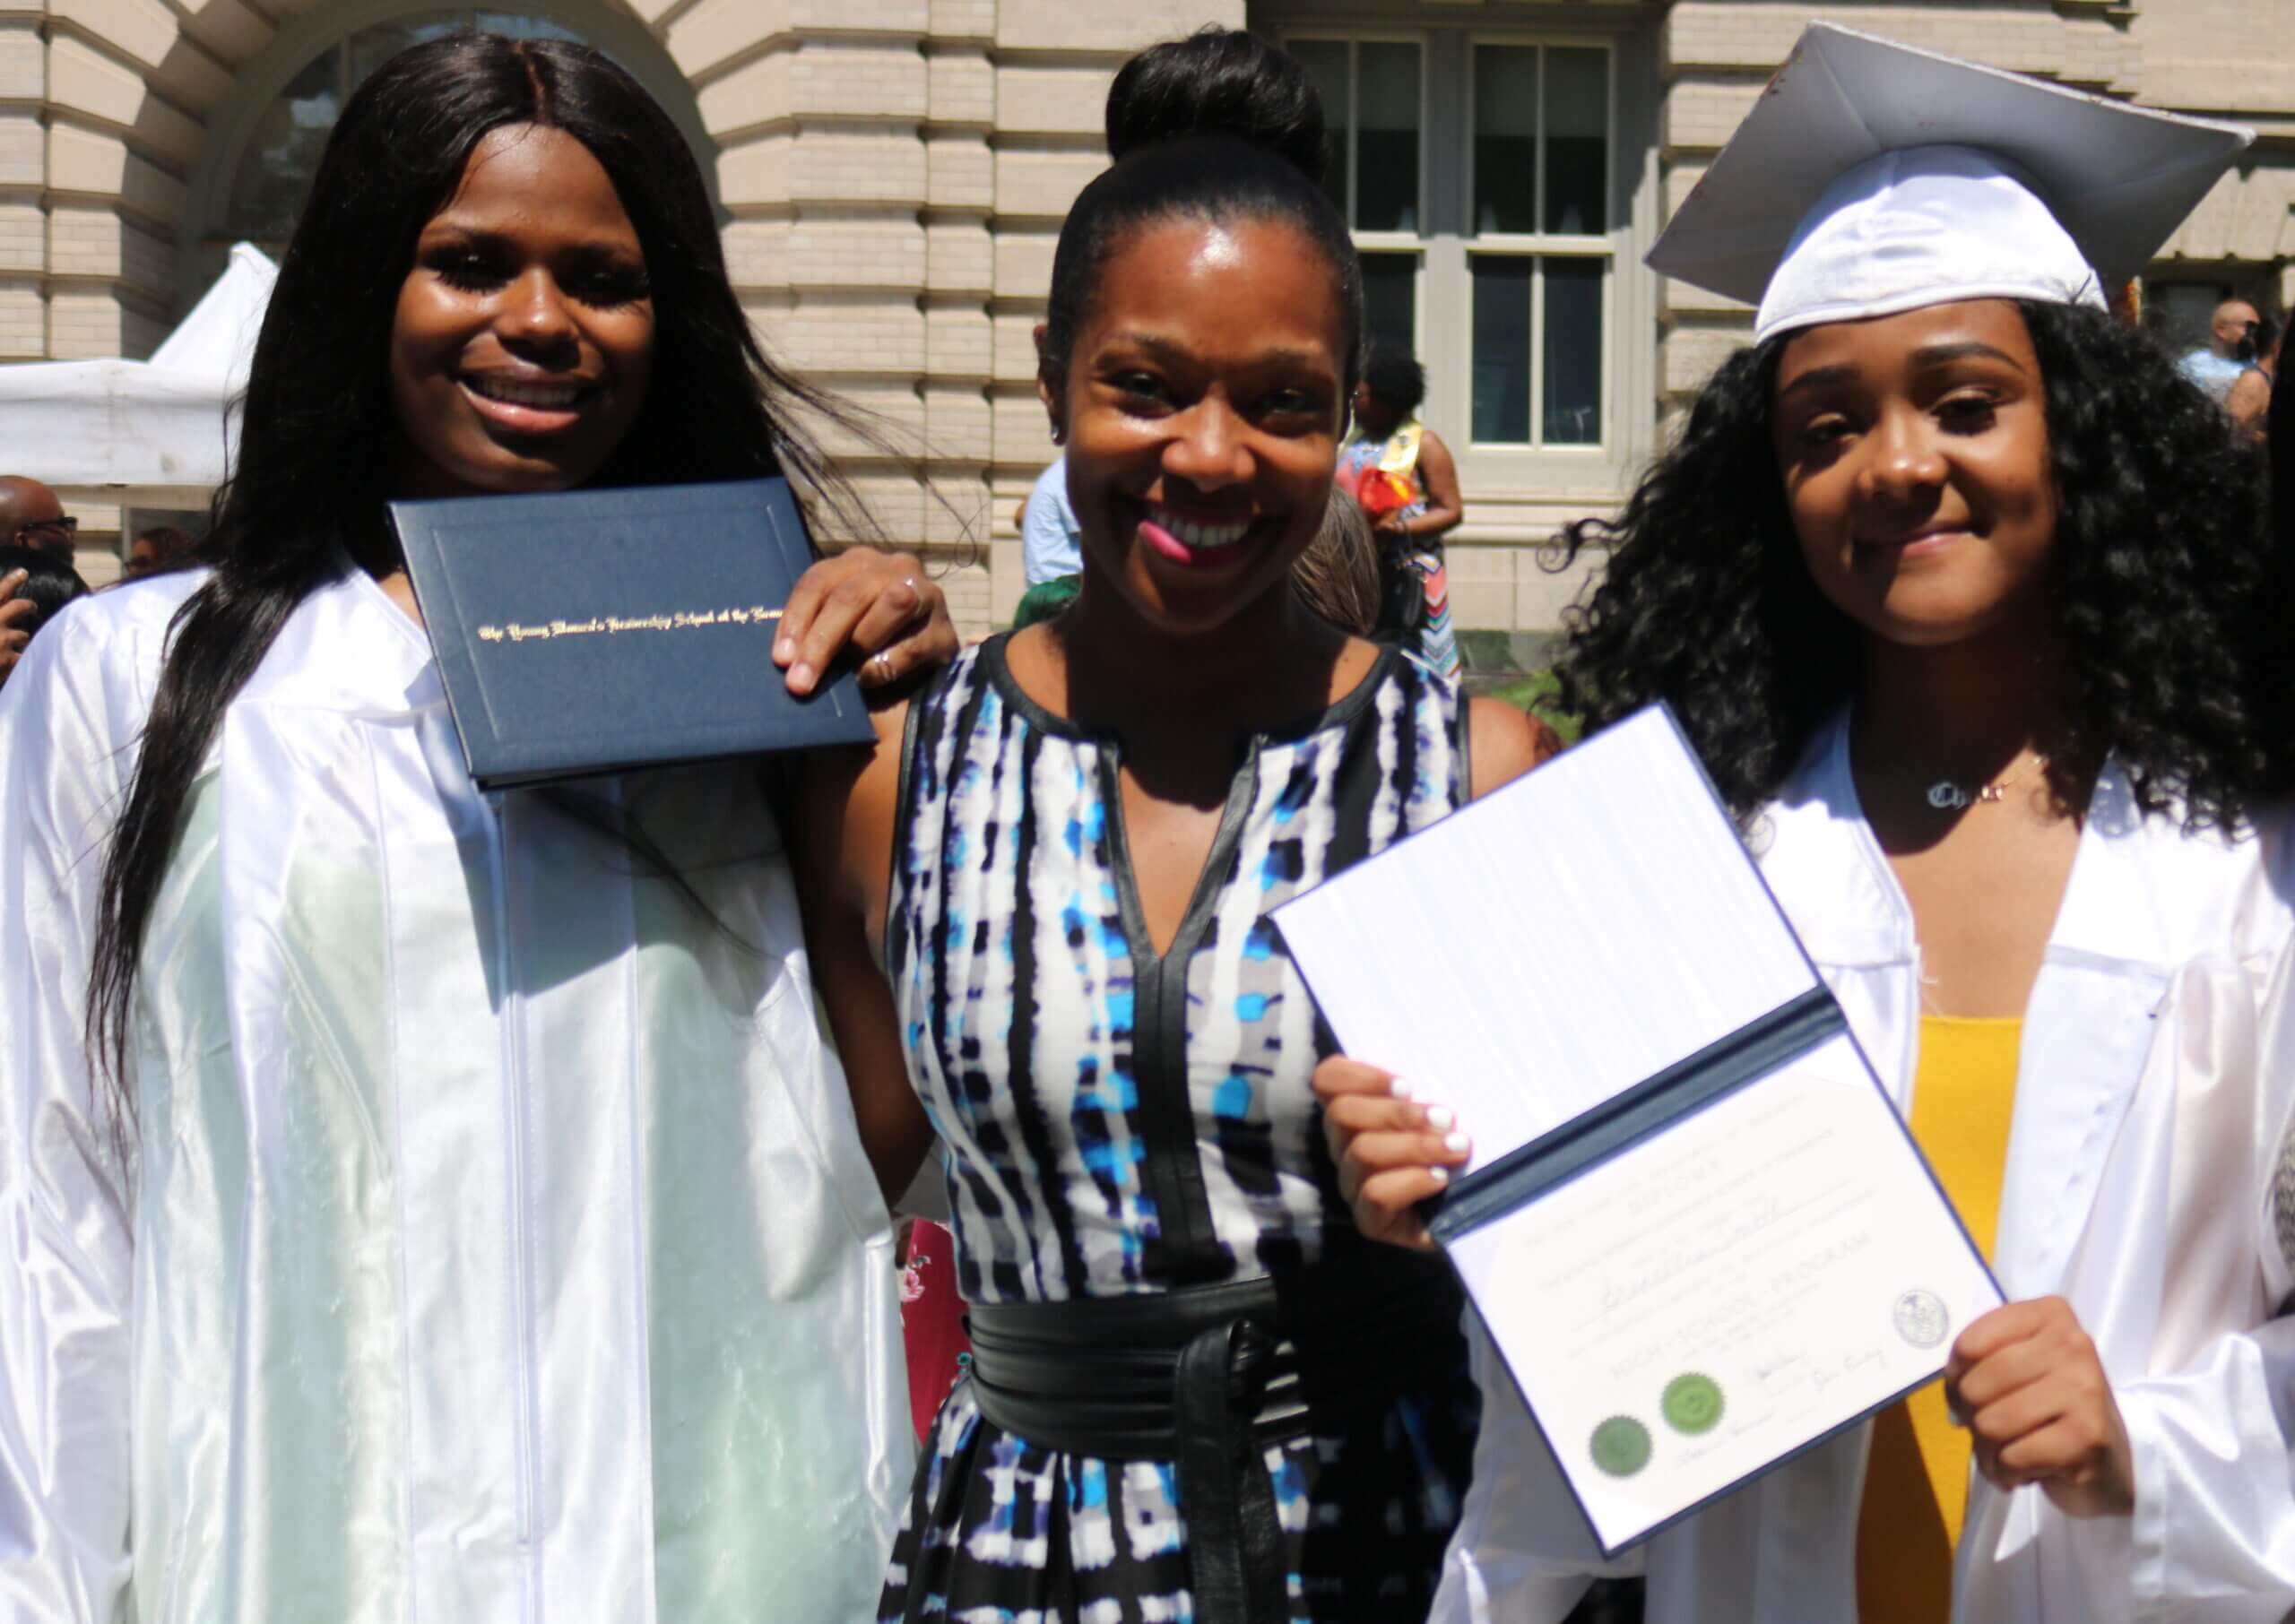 CEO Yolonda Marshall stands in between two graduates from The Young Women's Leadership School of the Bronx. The graduates are holding up their diplomas.